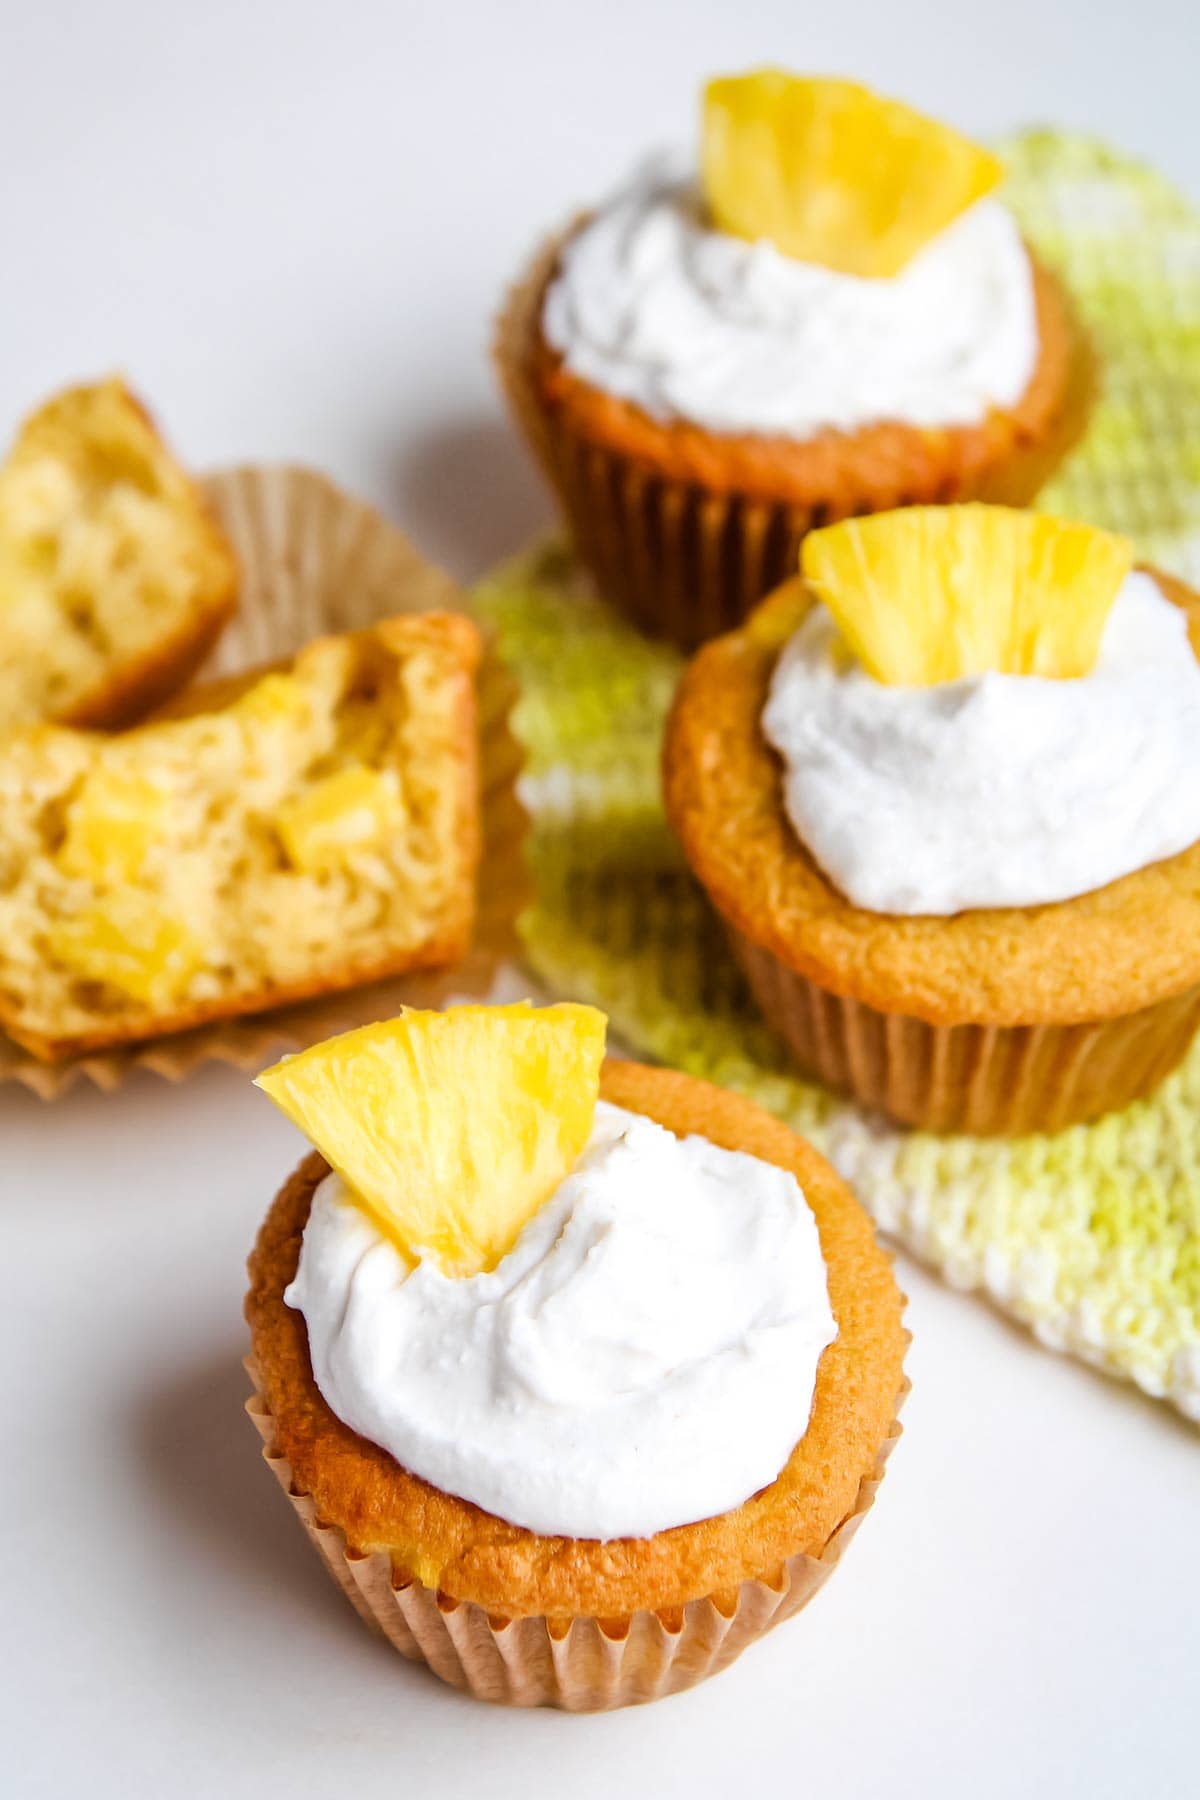 Gluten free pineapple muffins with cross-cut section in background